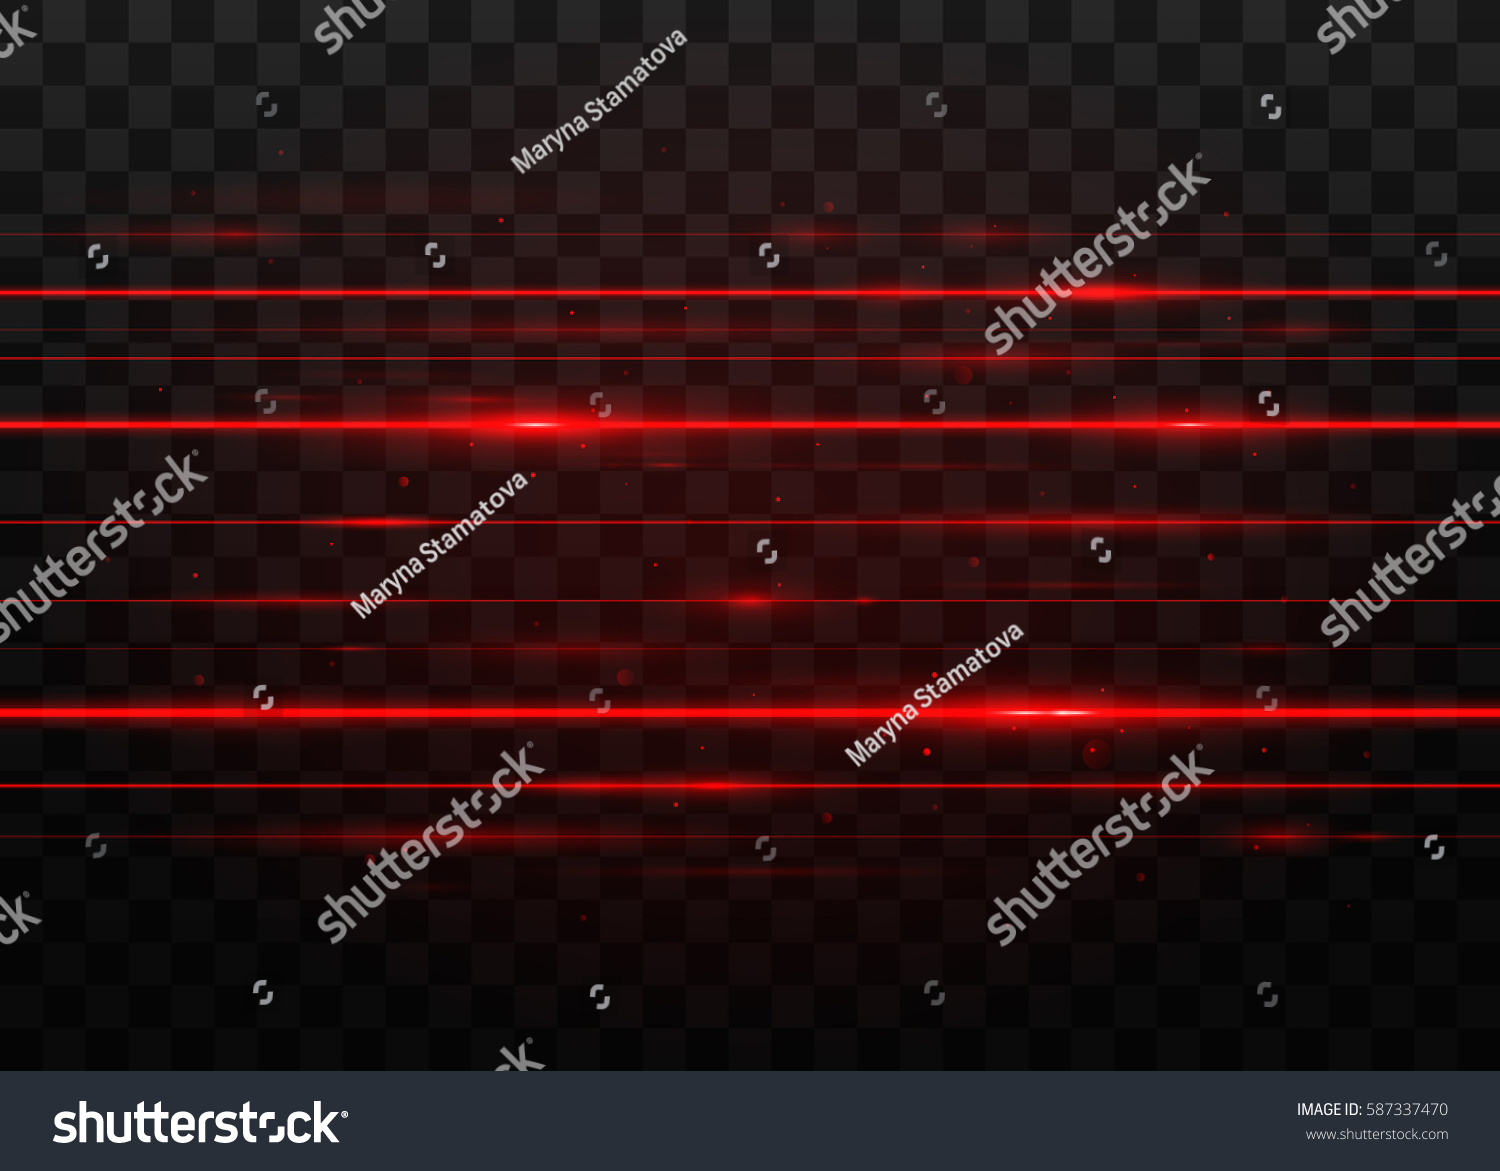 Abstract red laser beams. Isolated on transparent black background. Vector illustration, eps 10. #587337470